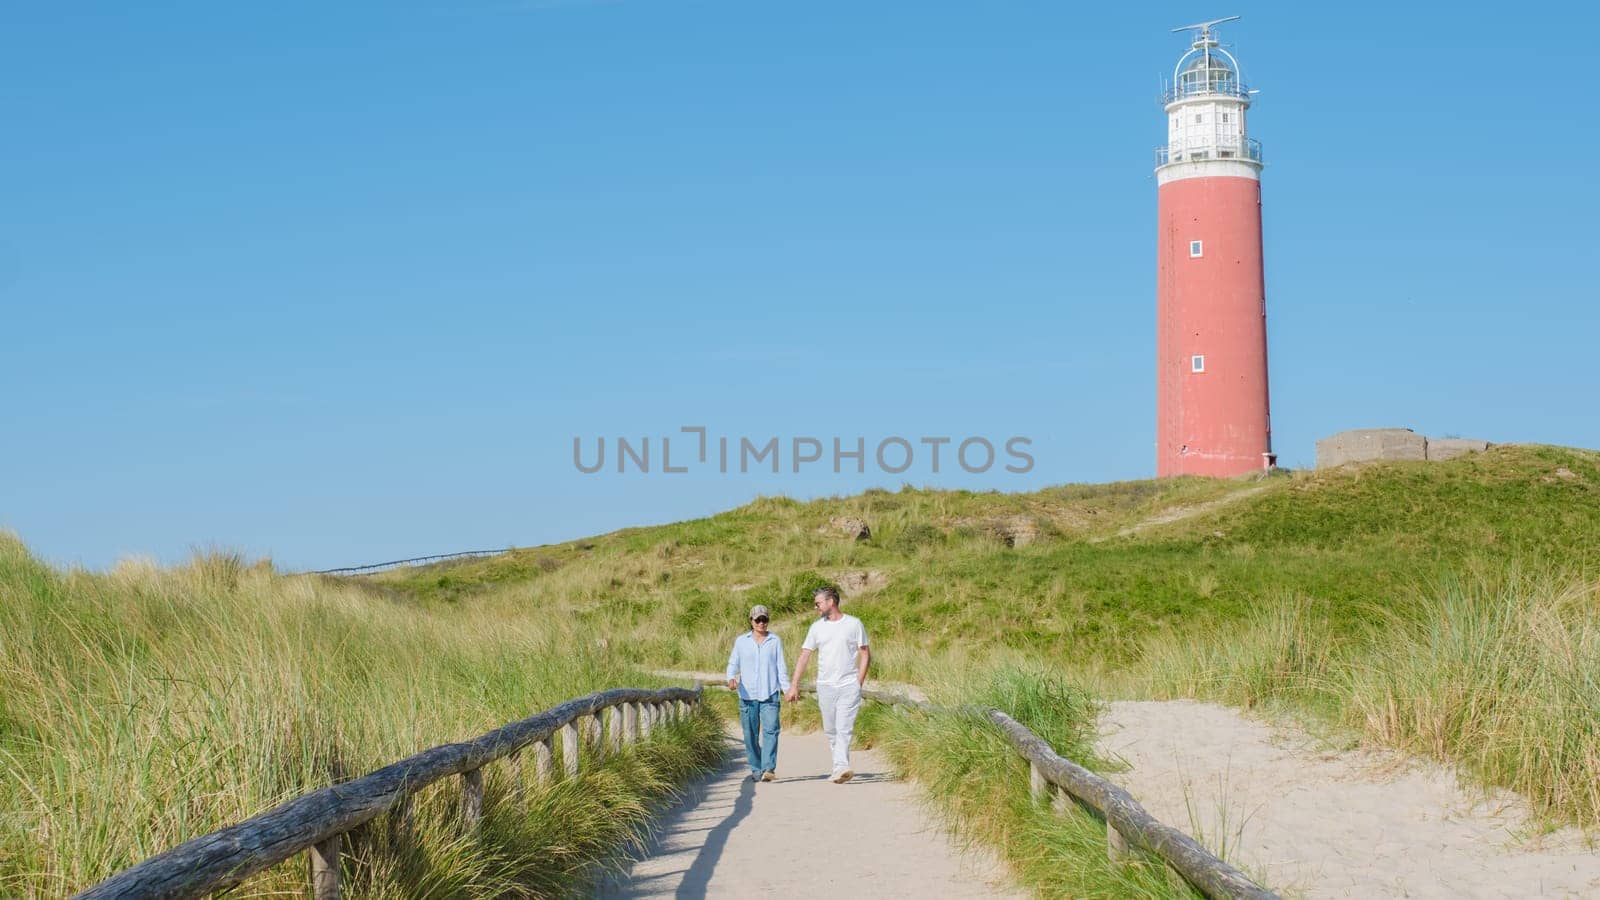 A man and a woman are strolling leisurely along a winding path near the iconic Texel lighthouse, enjoying the scenic view of the surrounding landscape. The iconic red lighthouse of Texel Netherlands